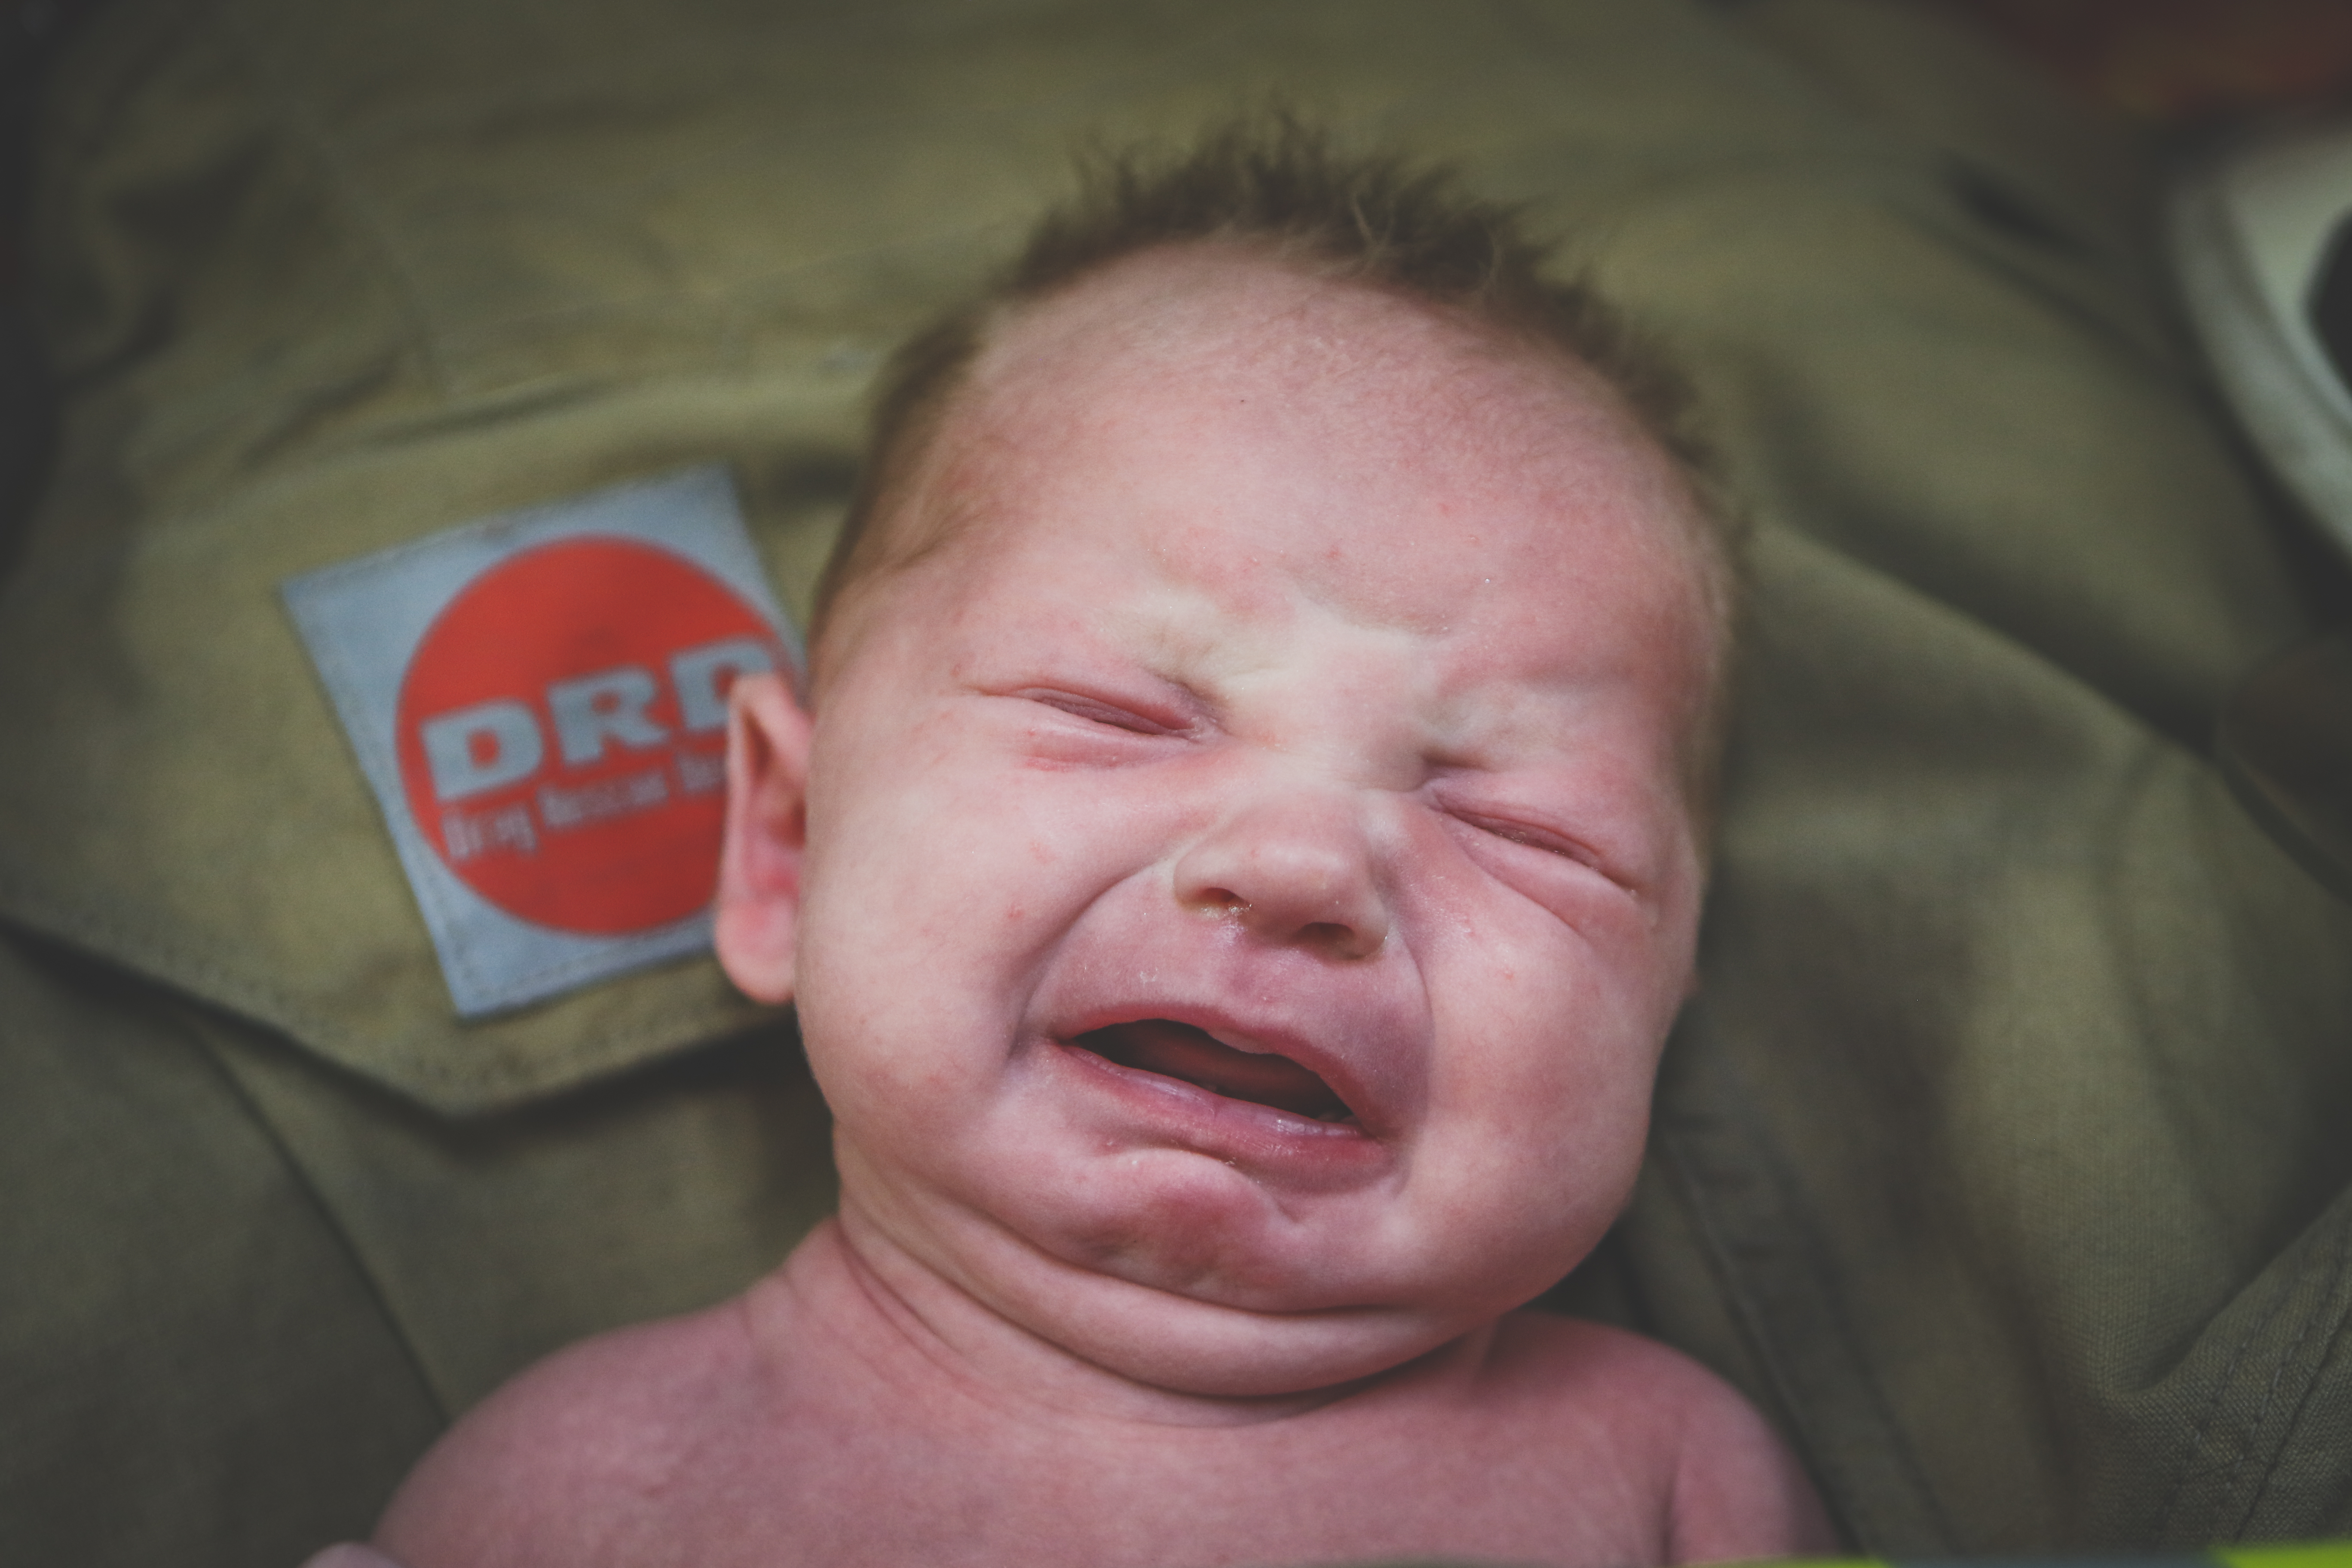 Mother's Day: A newborn baby crying 